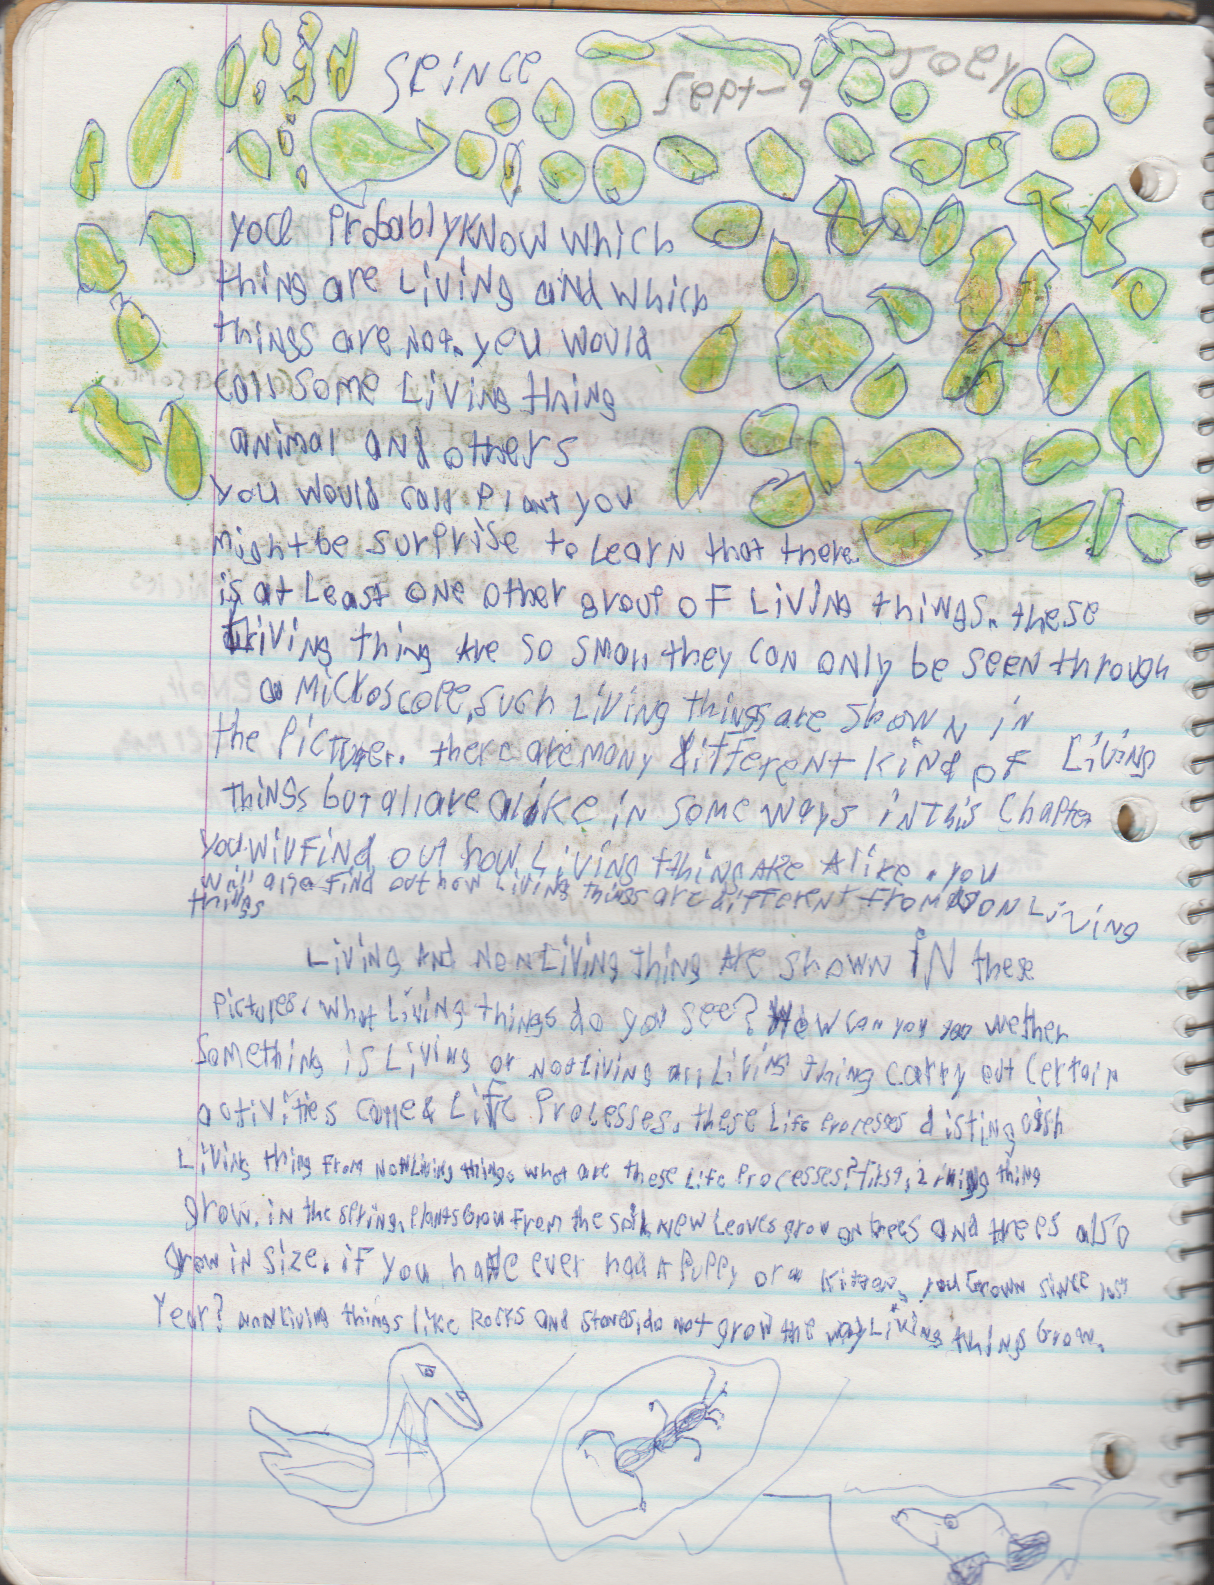 1996-08-18 - Saturday - 11 yr old Joey Arnold's School Book, dates through to 1998 apx, mostly 96, Writings, Drawings, Etc-015 ok.png